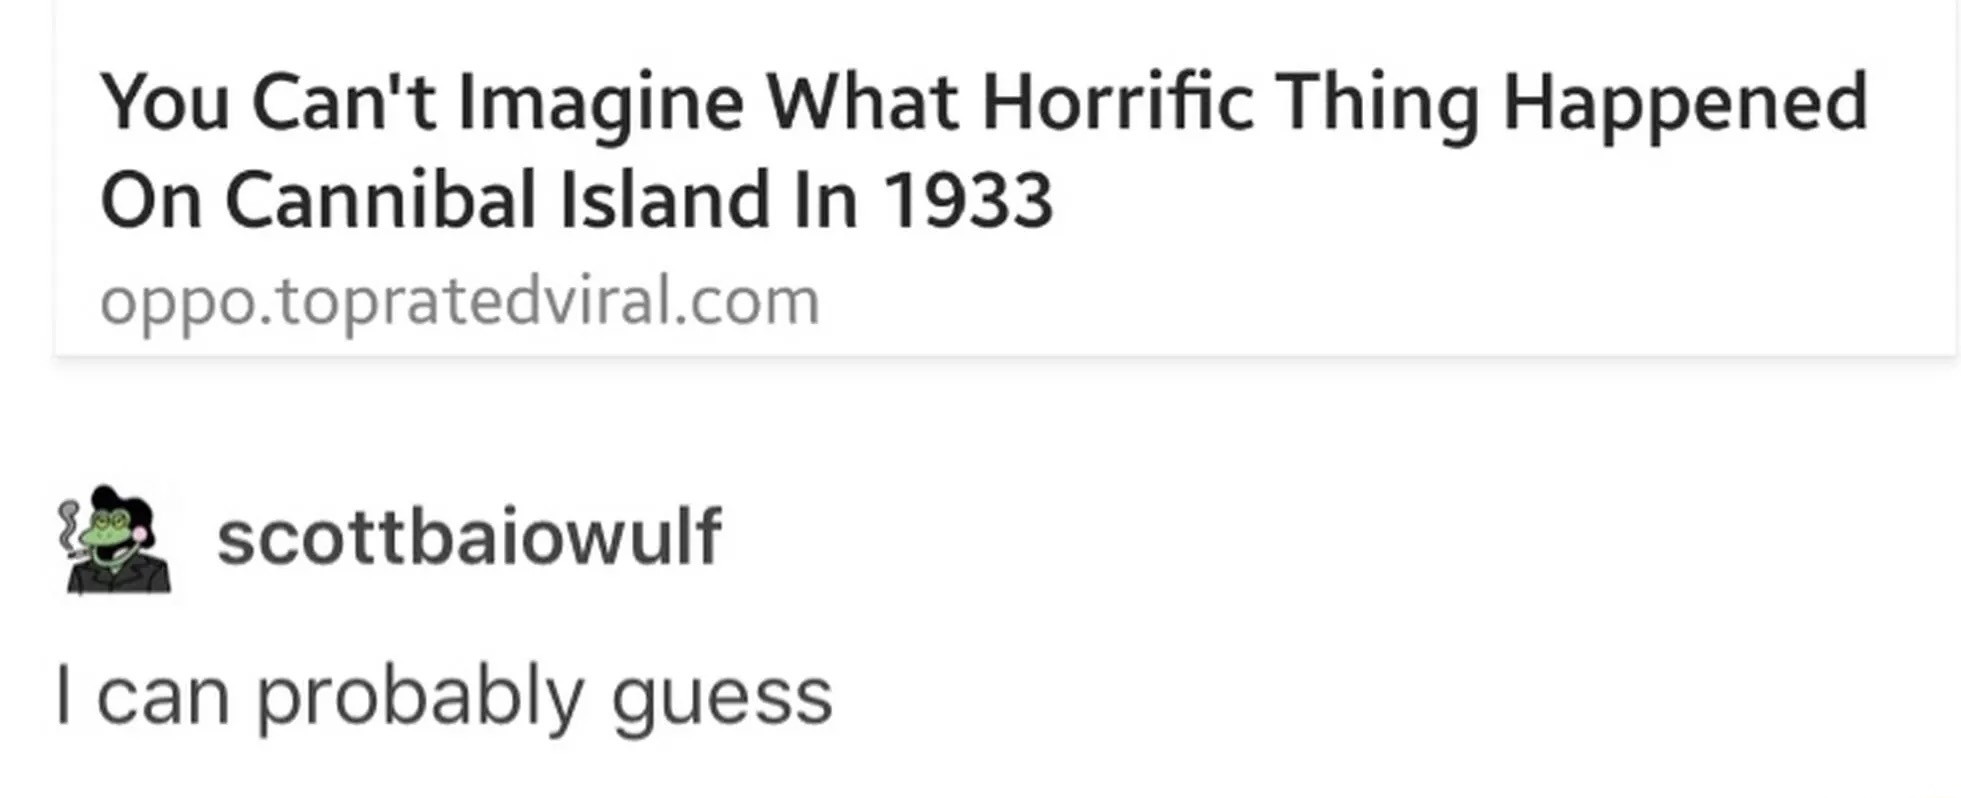 memes- You Can't Imagine What Horrific Thing Happened On Cannibal Island In 1933 oppo.topratedviral.com scottbaiowulf I can probably guess